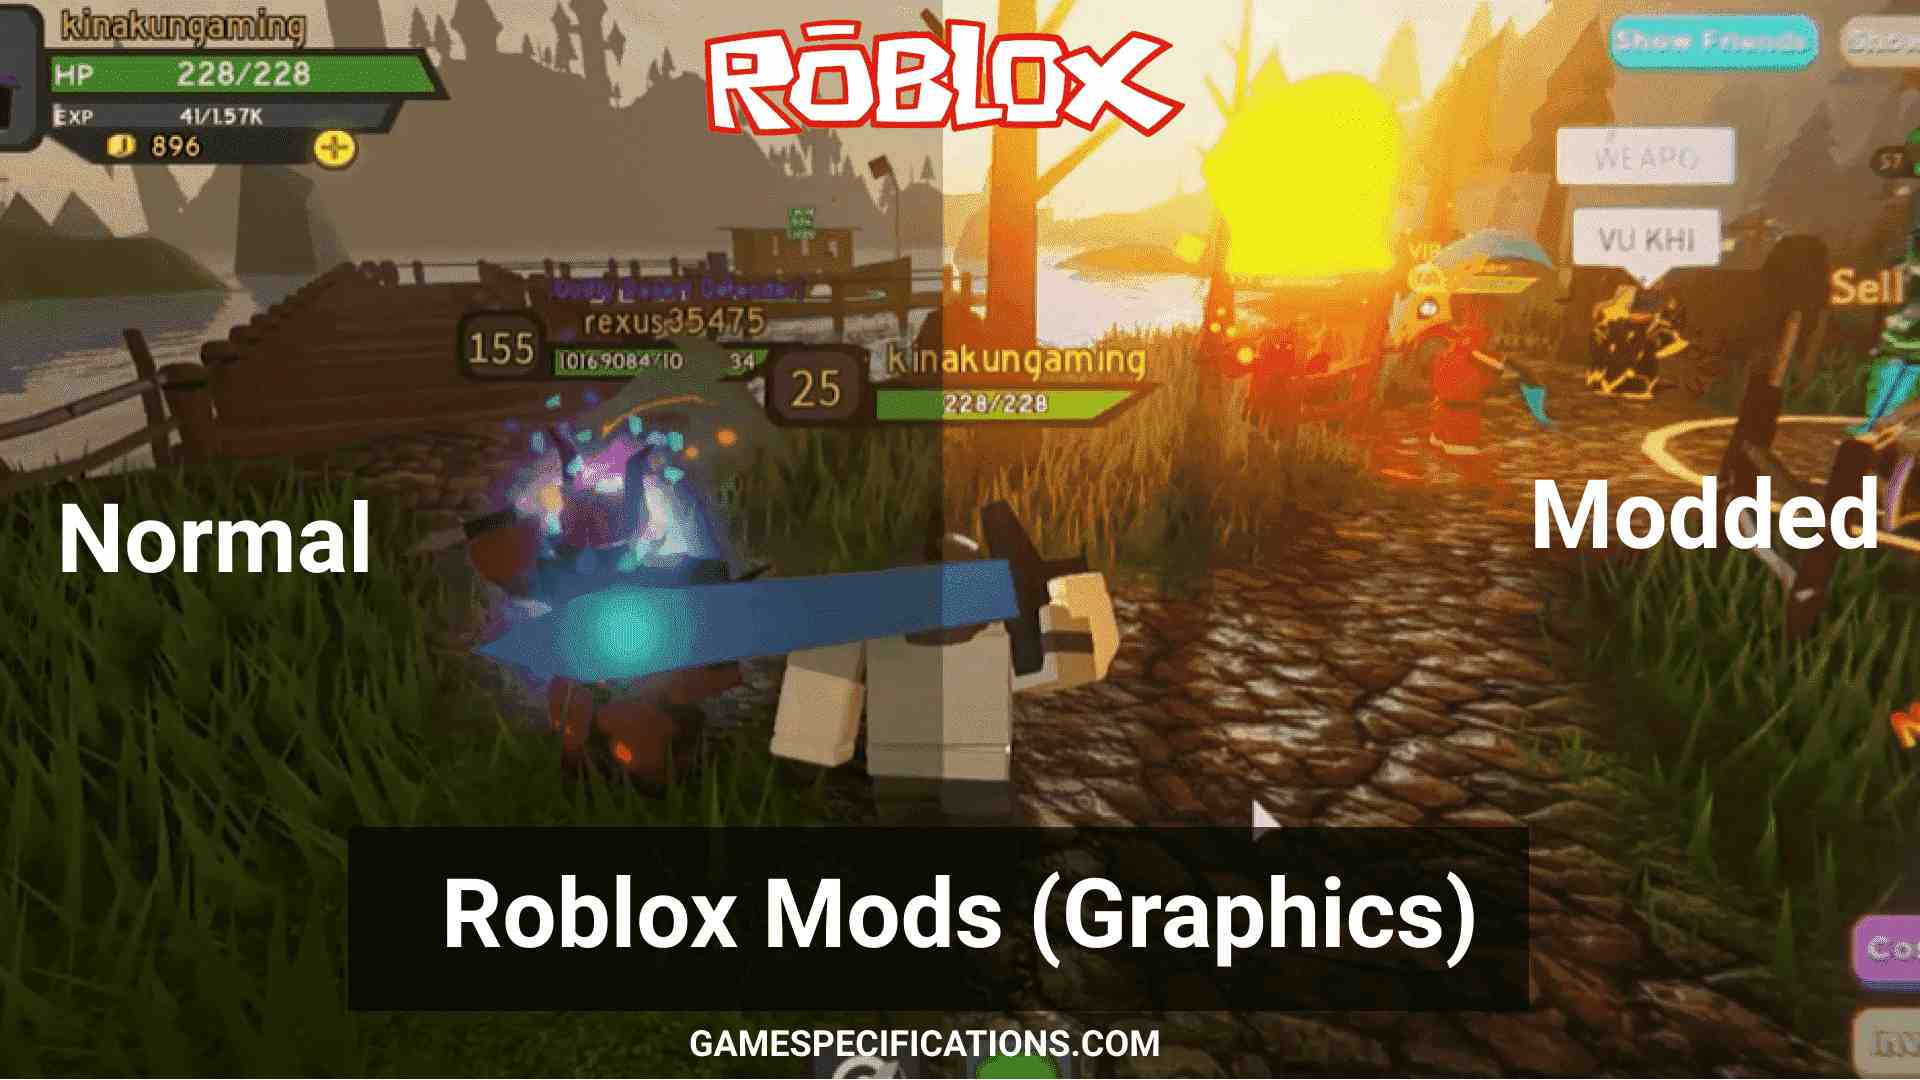 Roblox Mods An Ultimate Boost To Roblox Graphics 2021 Game Specifications - 2021 dlls for roblox